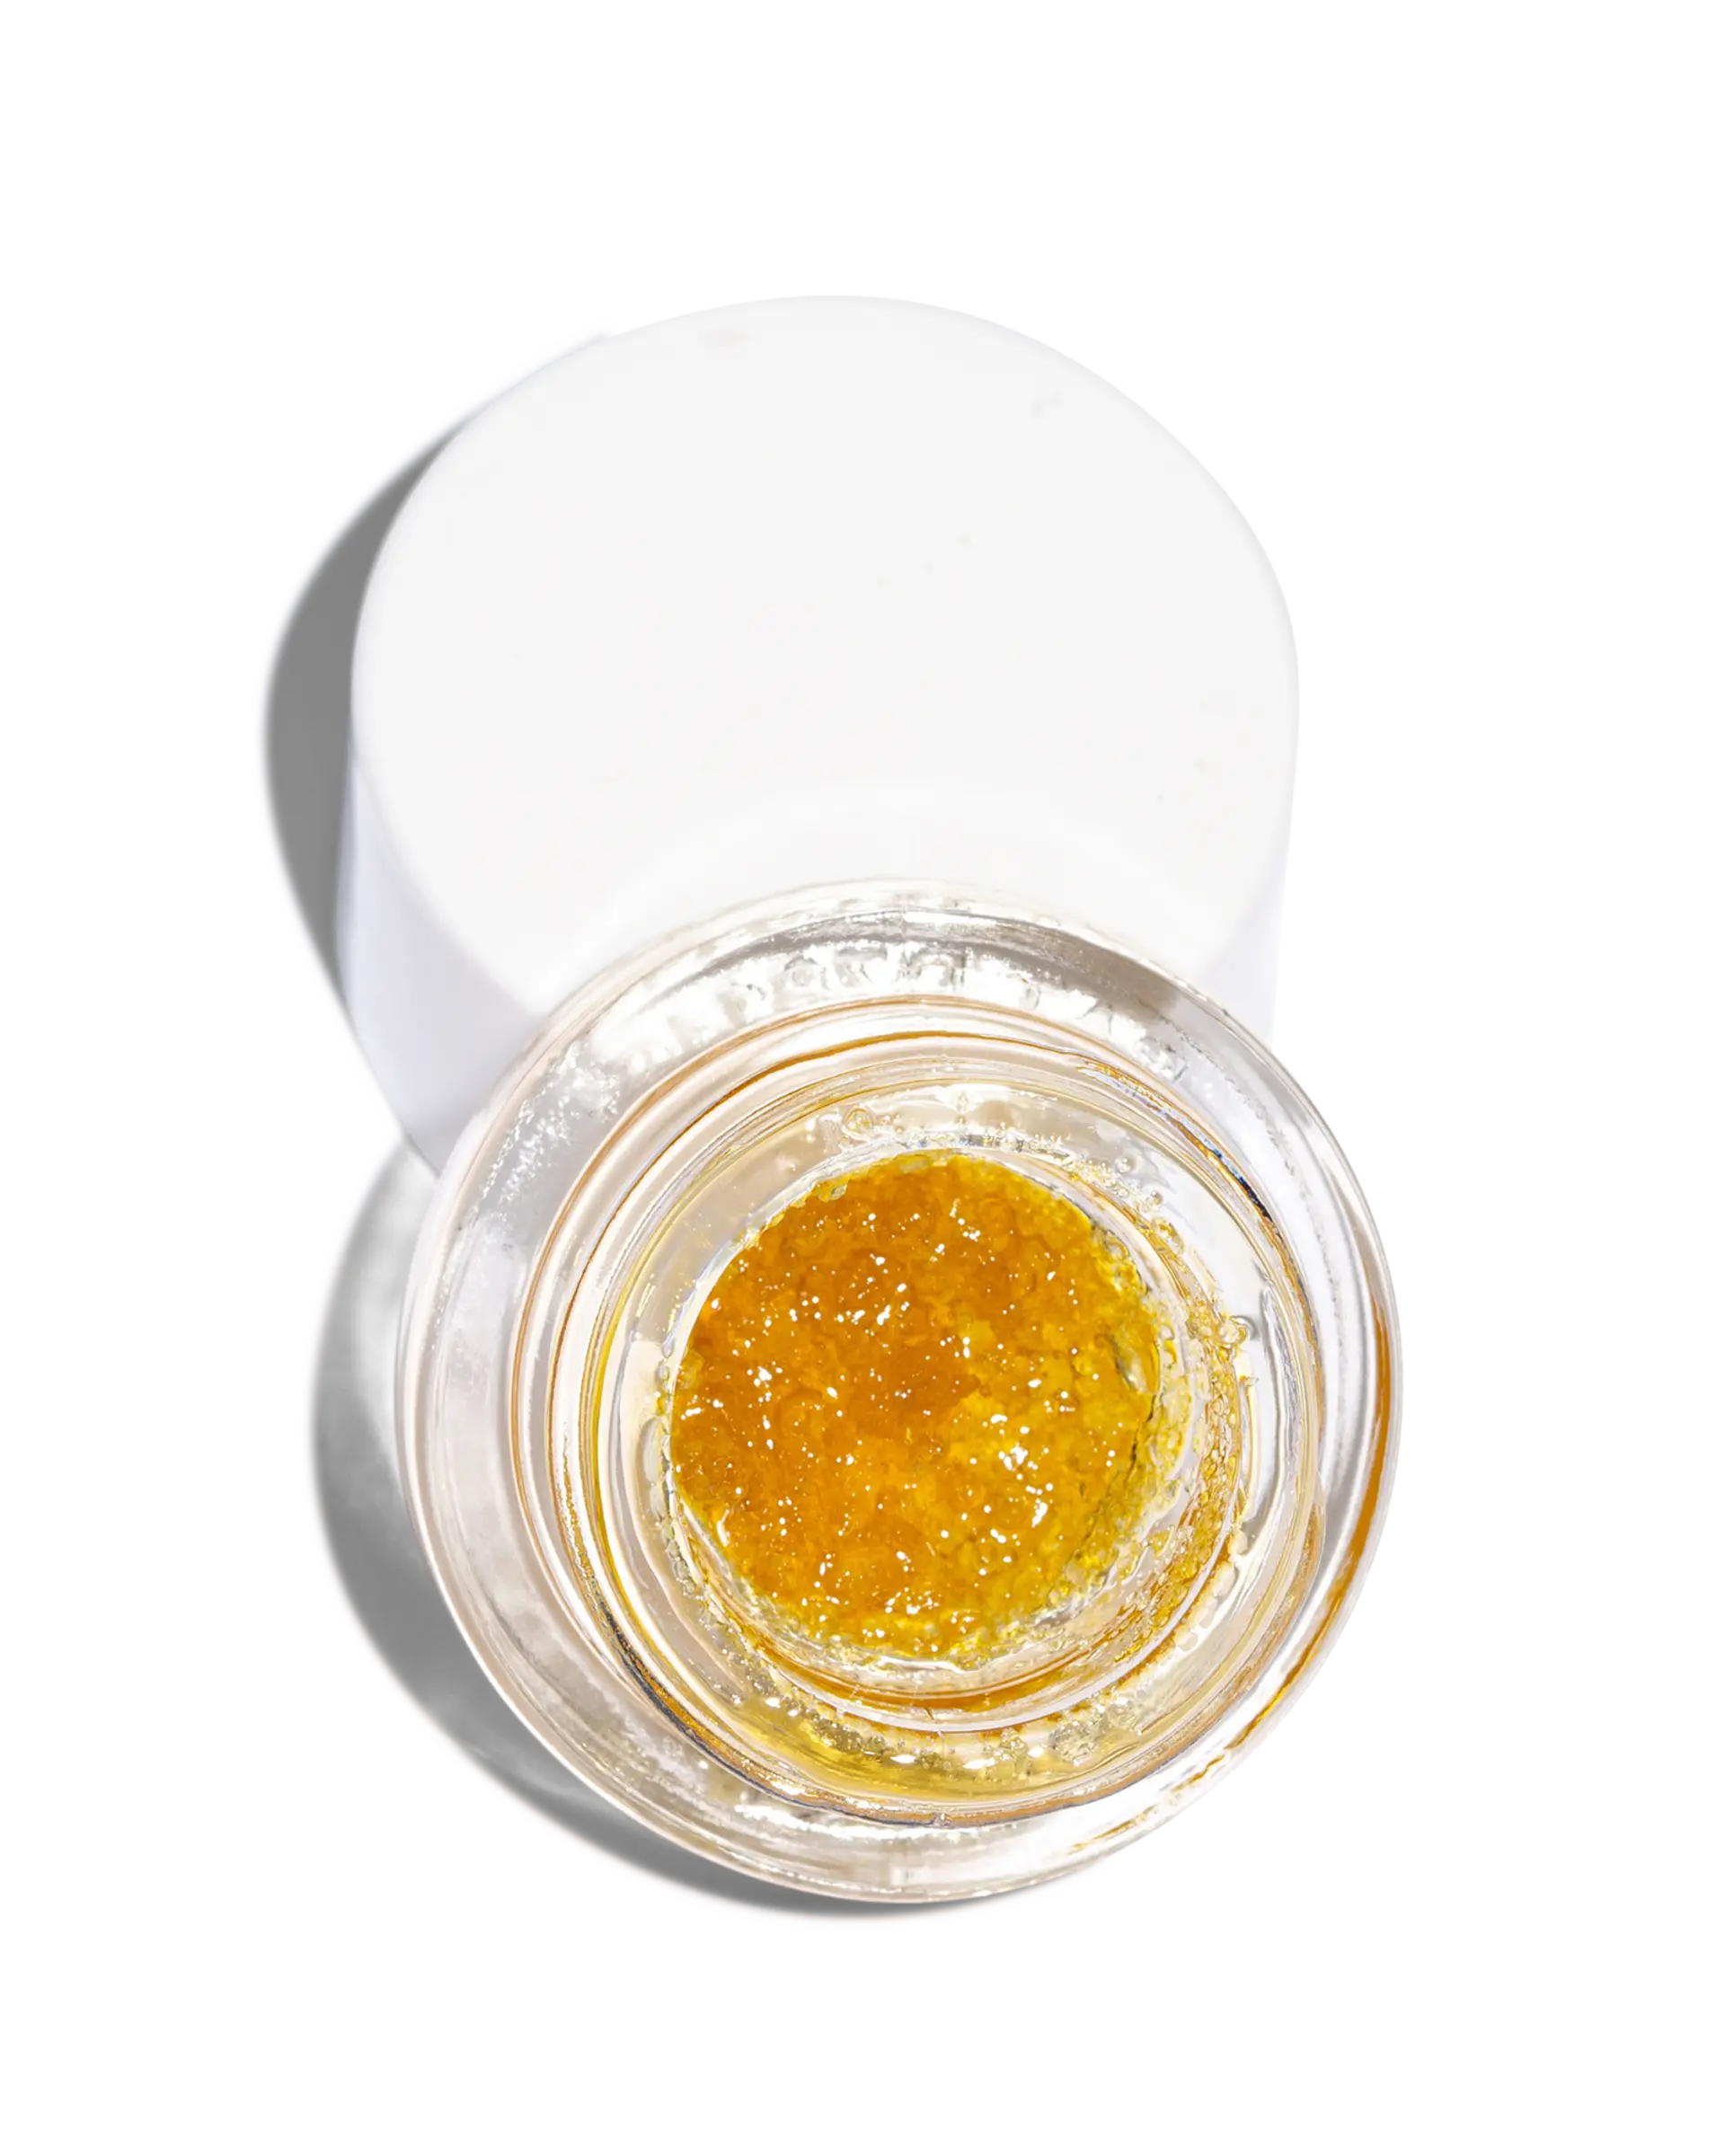 Koffee Live Resin 1g, 1 of 2